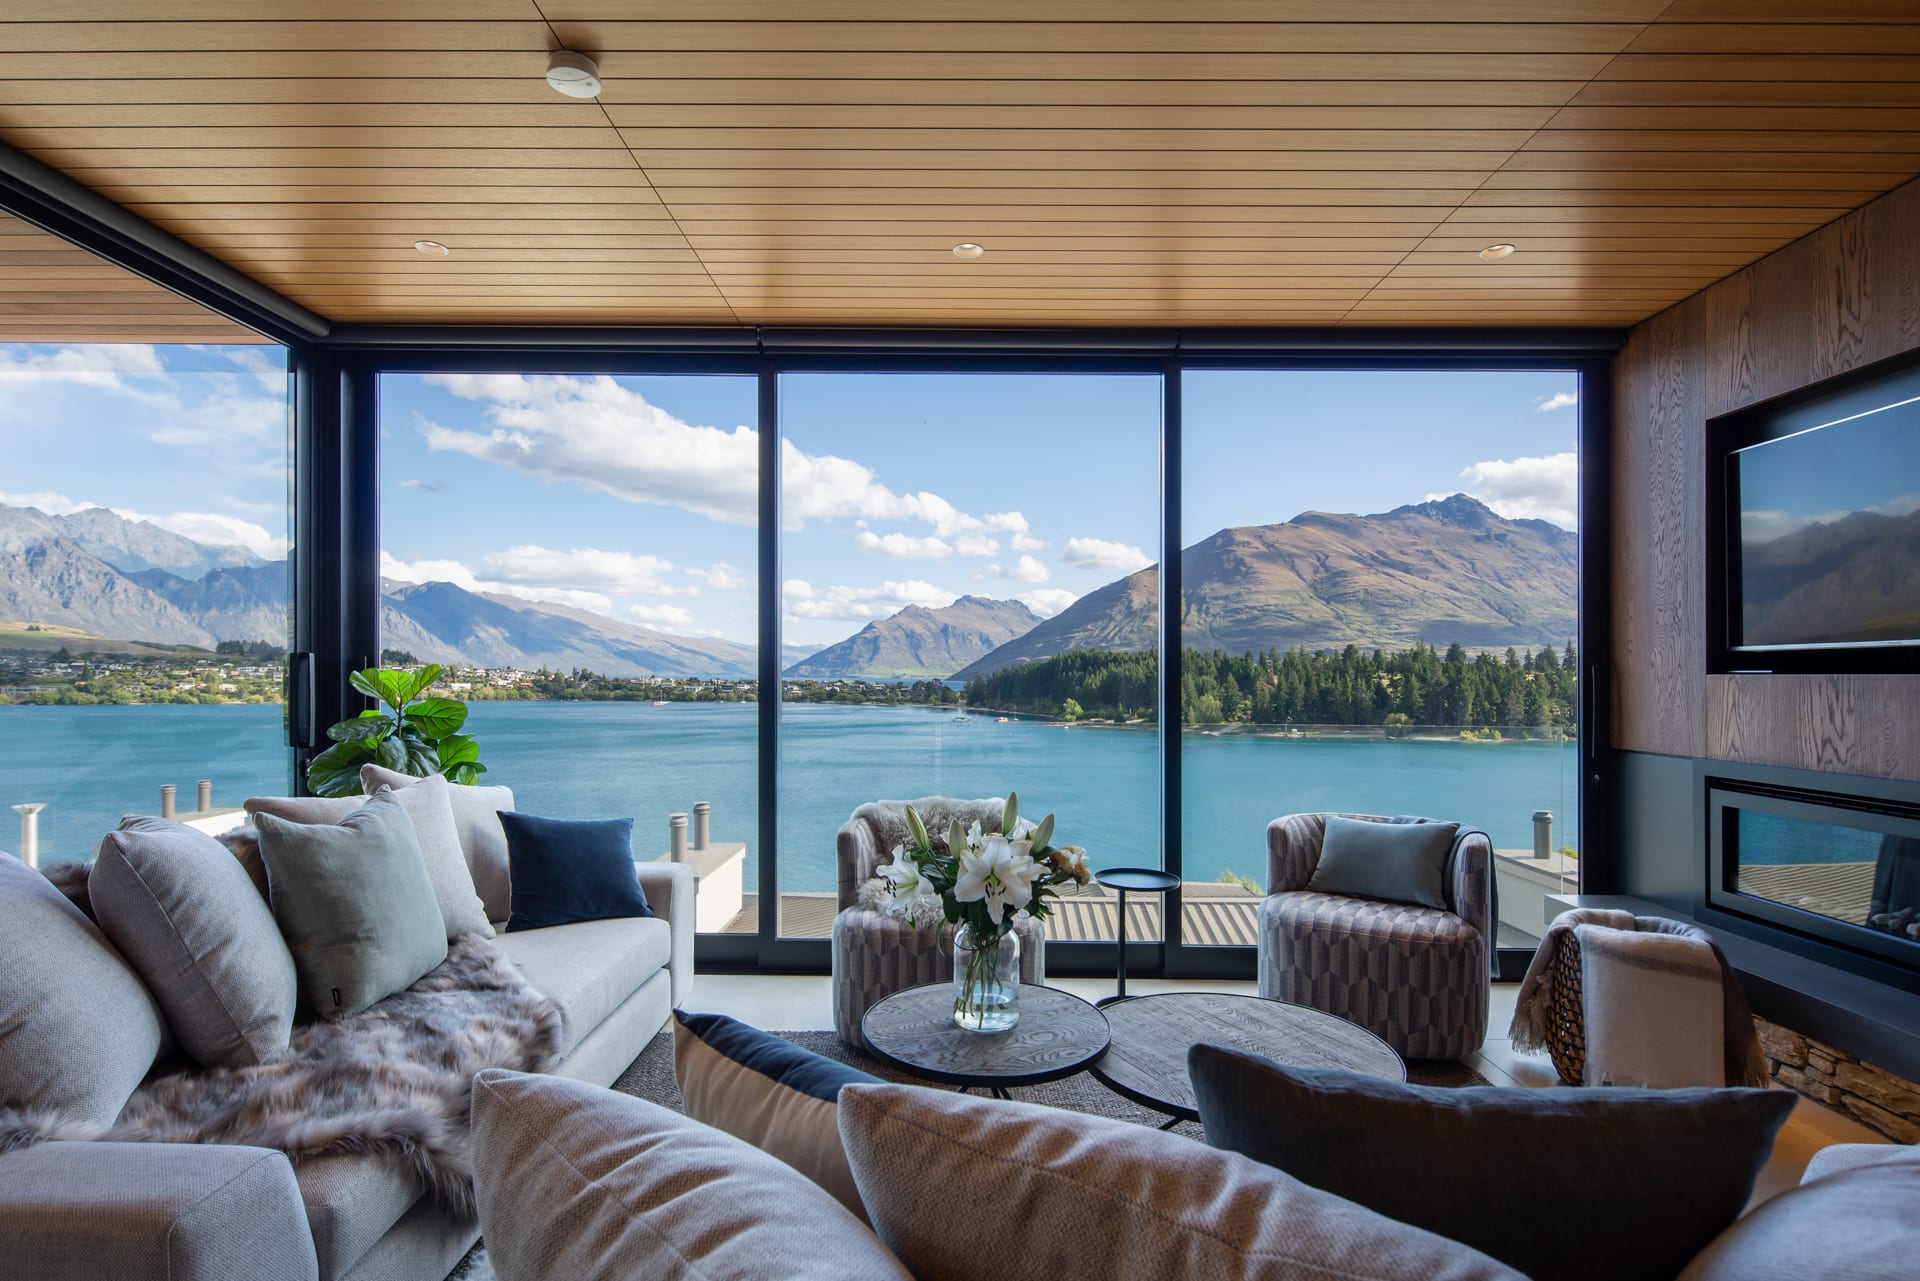 Beautiful lounge area with stunning views over the lake and mountains